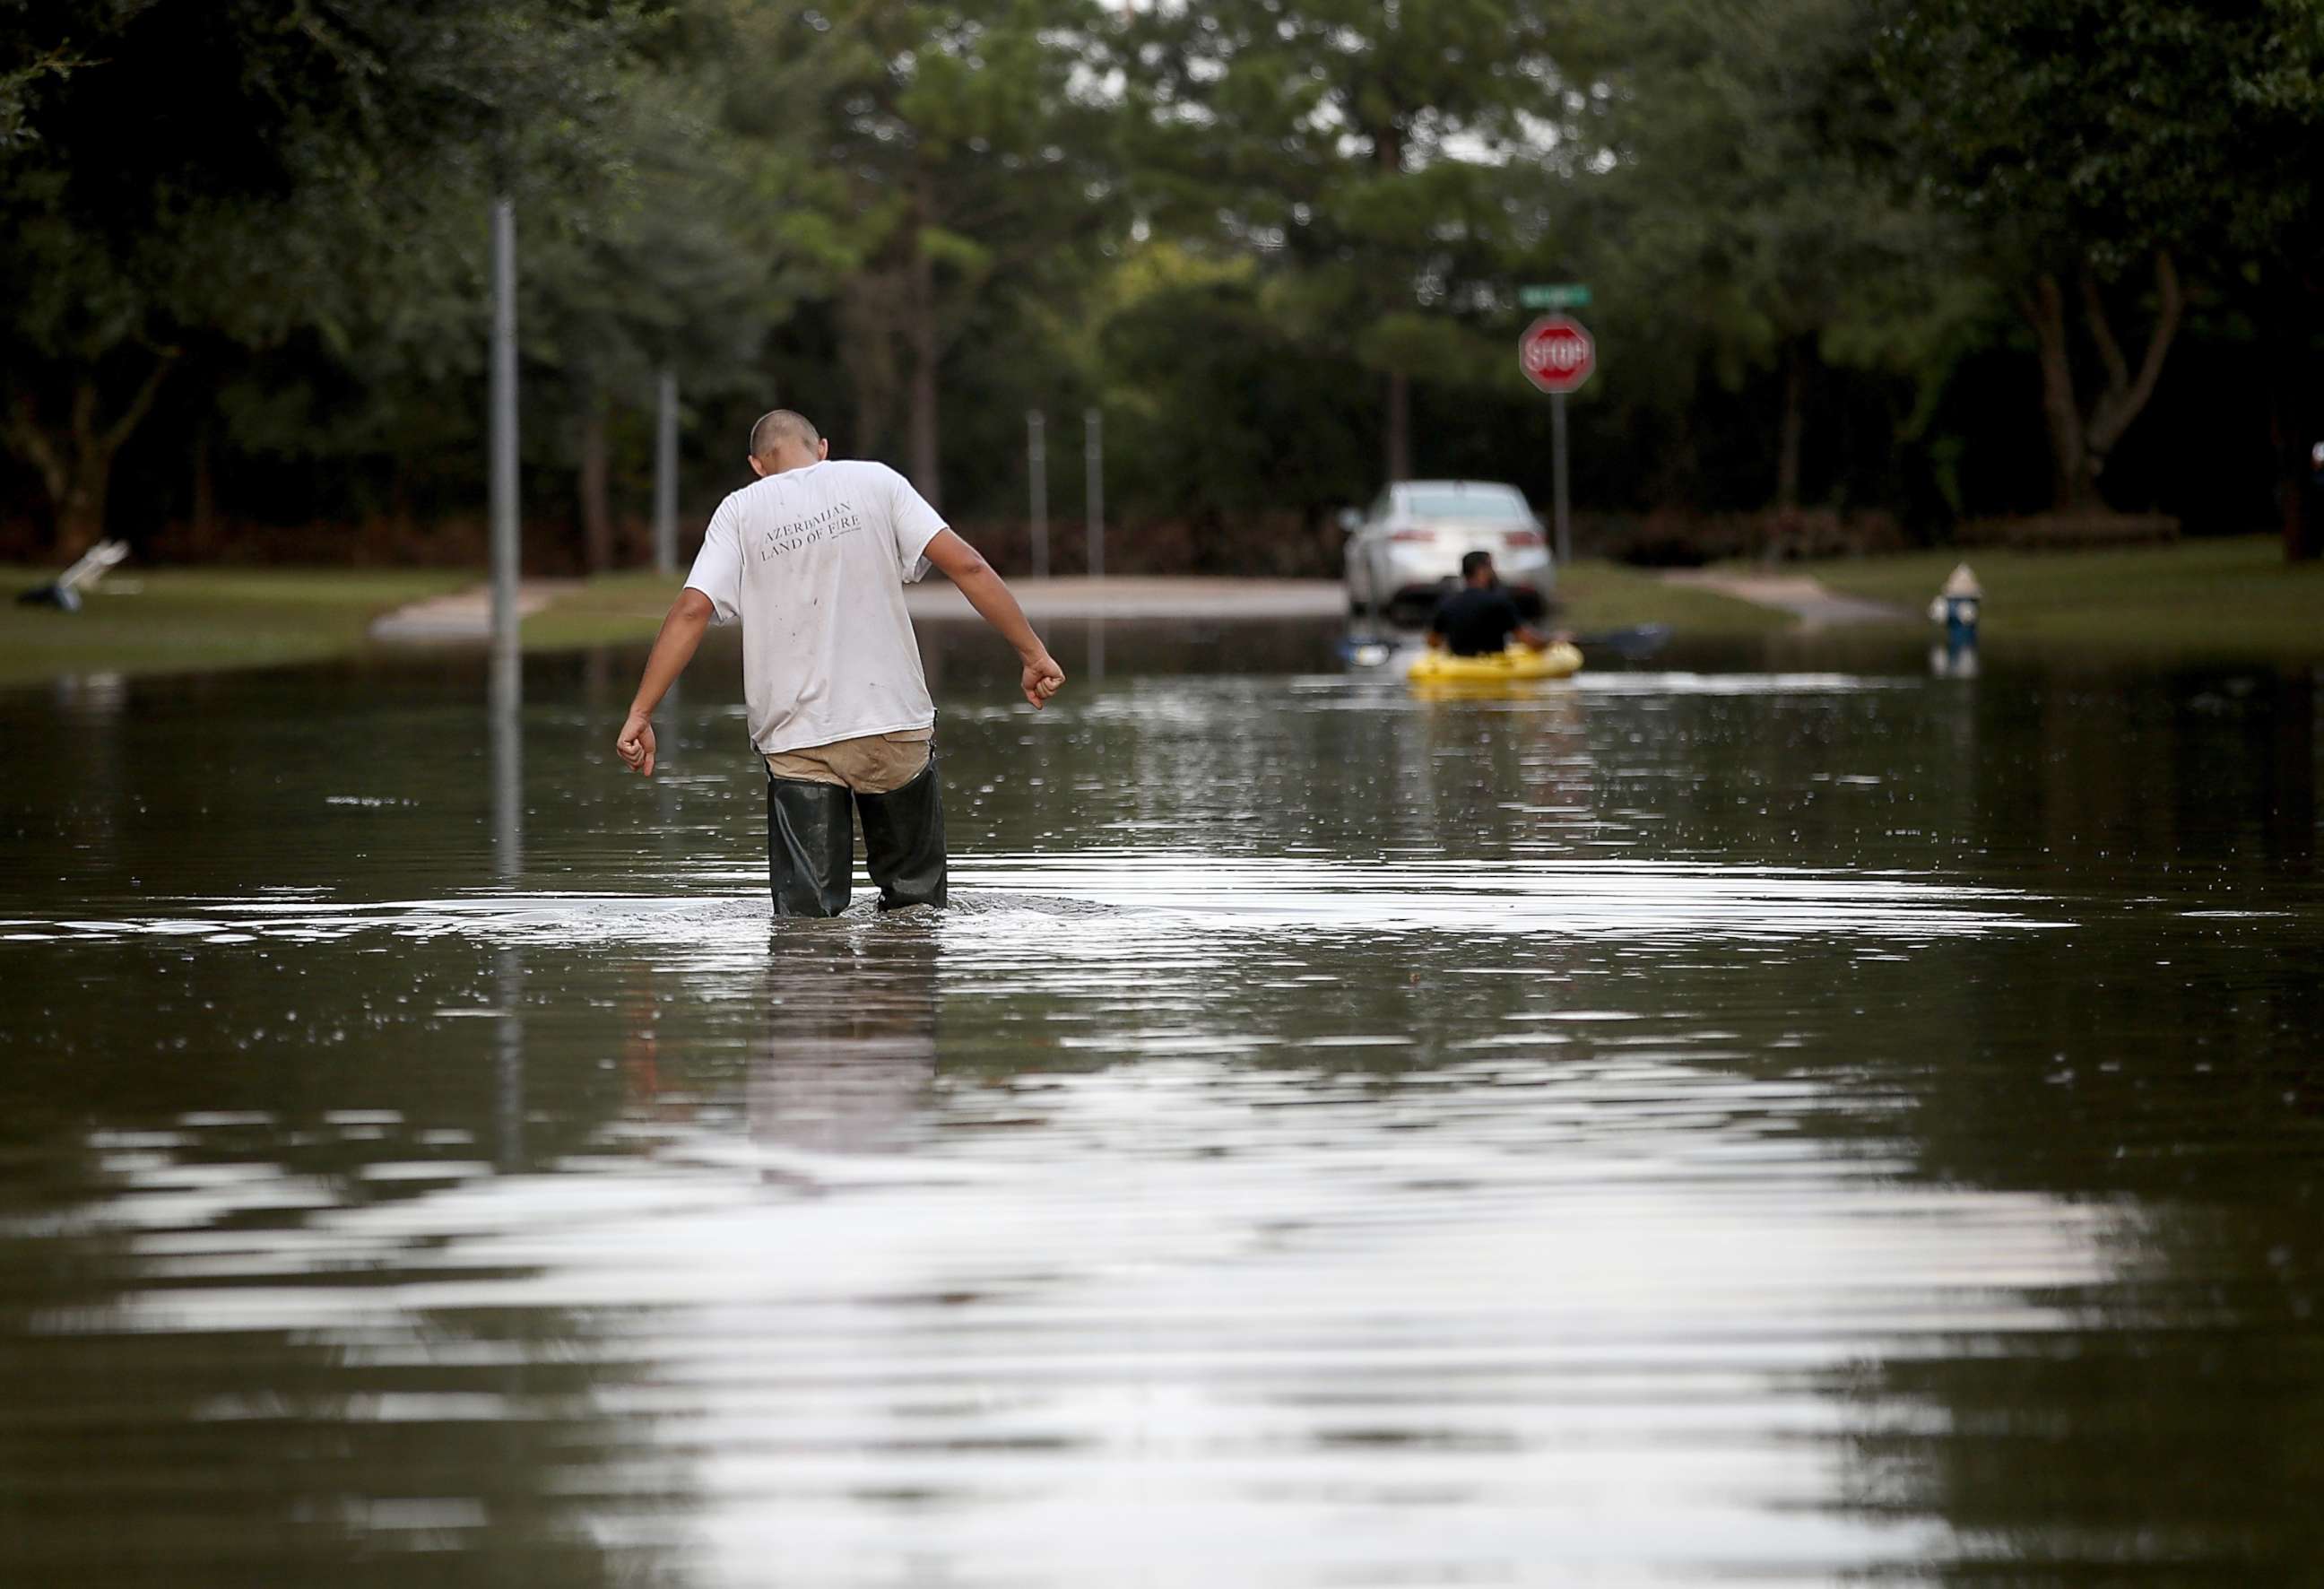 PHOTO: A man walks through a flooded street, Sept. 4, 2017, in Katy, Texas. Over a week after Hurricane Harvey hit Southern Texas.